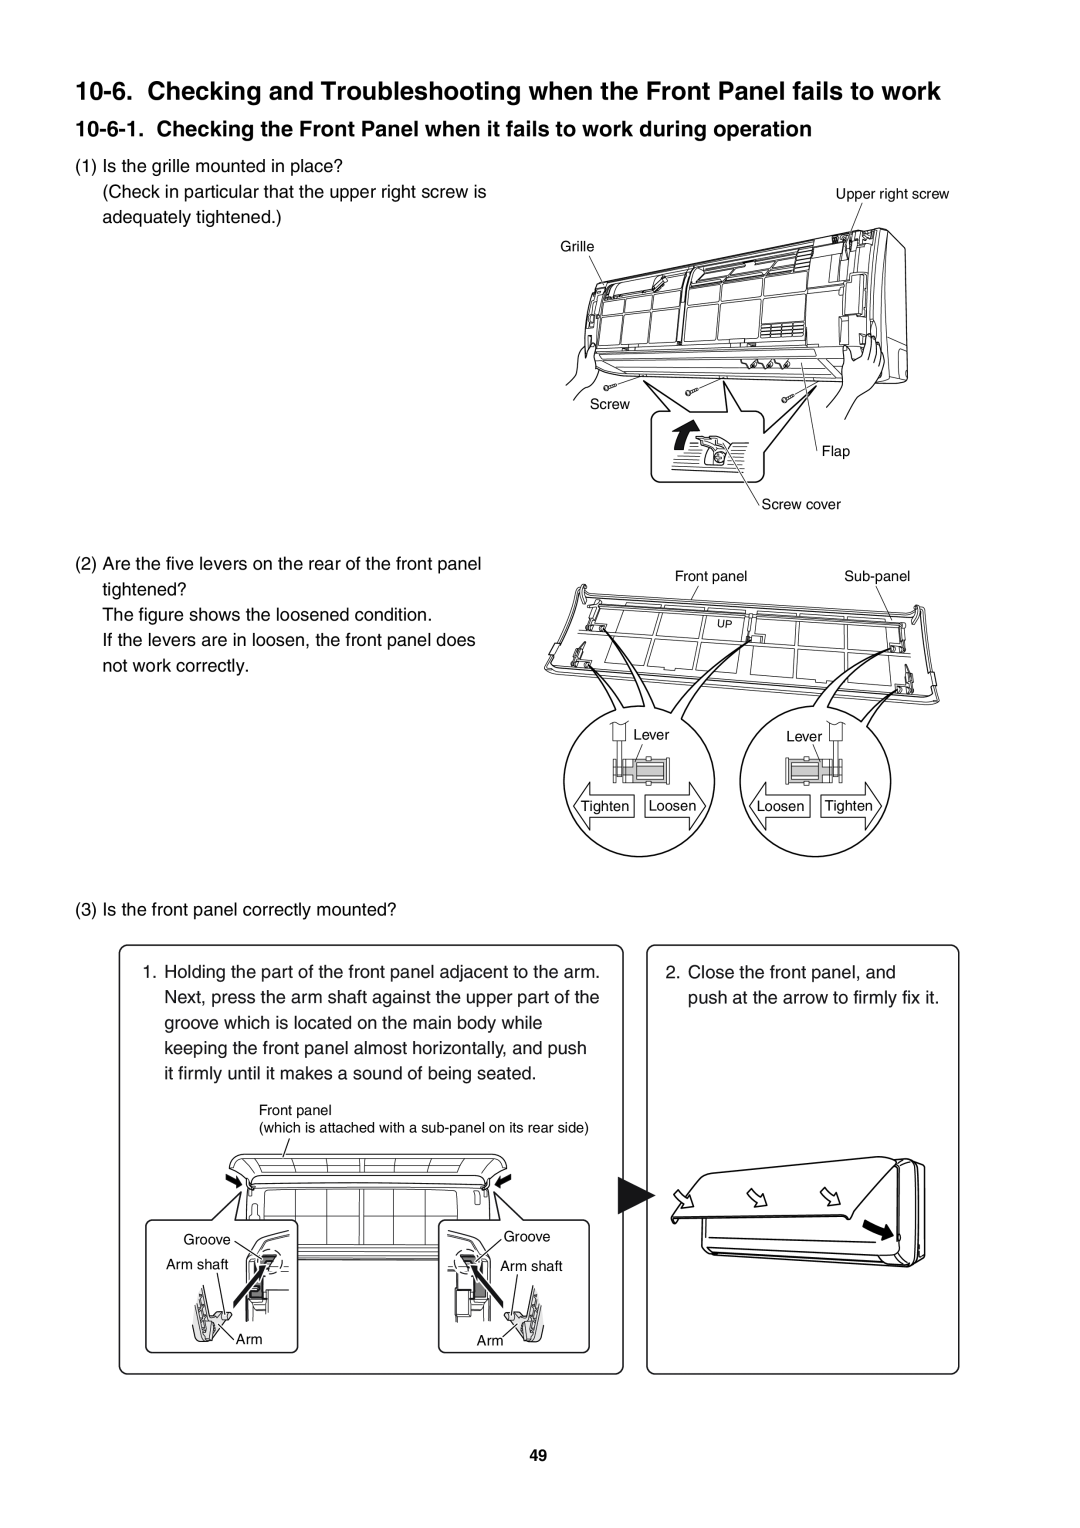 Sanyo SAP-KRV94EHDX service manual 1Is the grille mounted in place? 